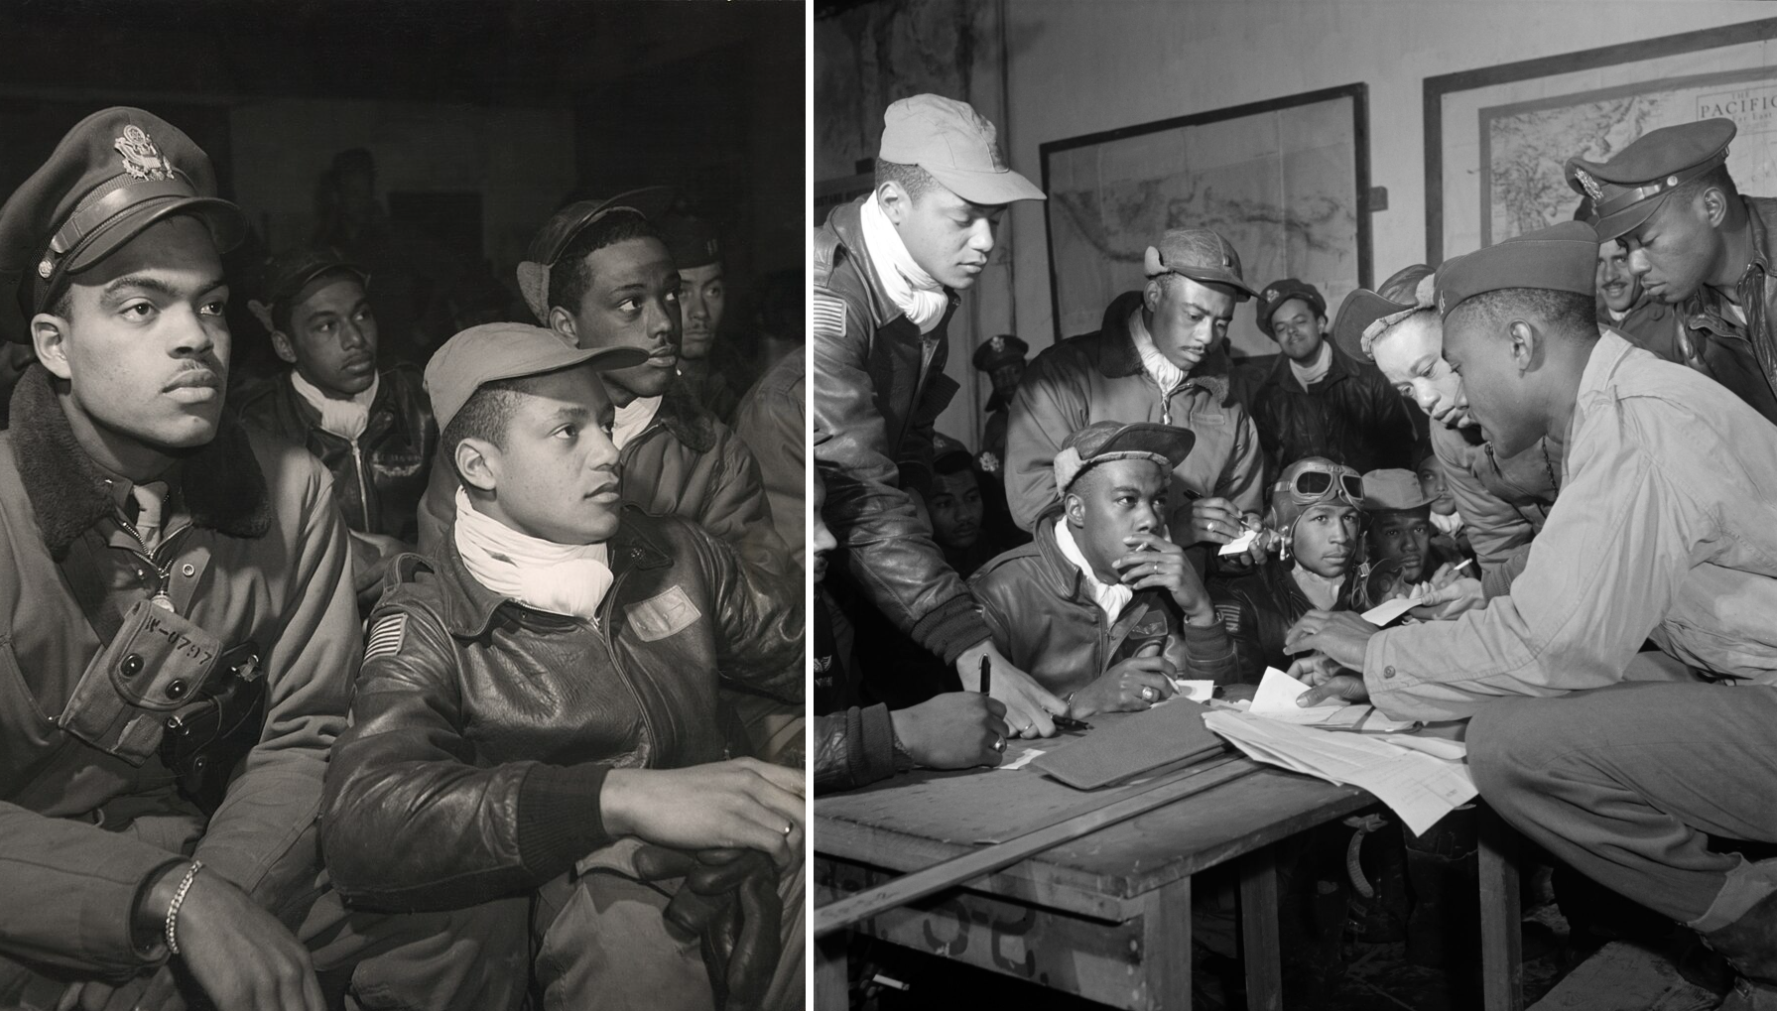 Tuskegee Airmen 332nd Fighter Group pilots (left).  Several Tuskegee Airmen at Ramitelli, Italy, March 1945 (right).